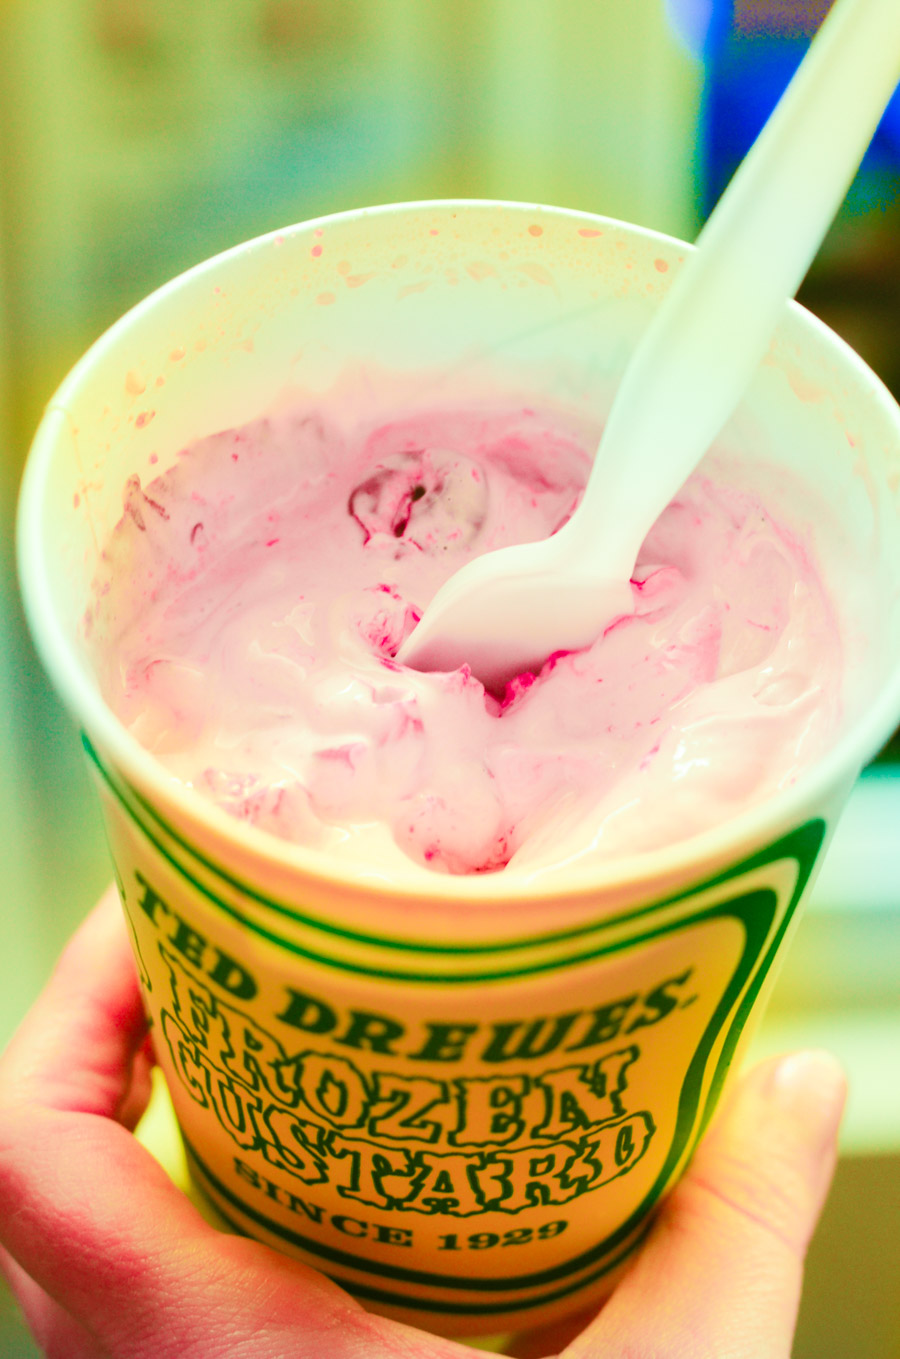 Where to Eat in St. Louis | Restaurant Guide | Ted Drewes